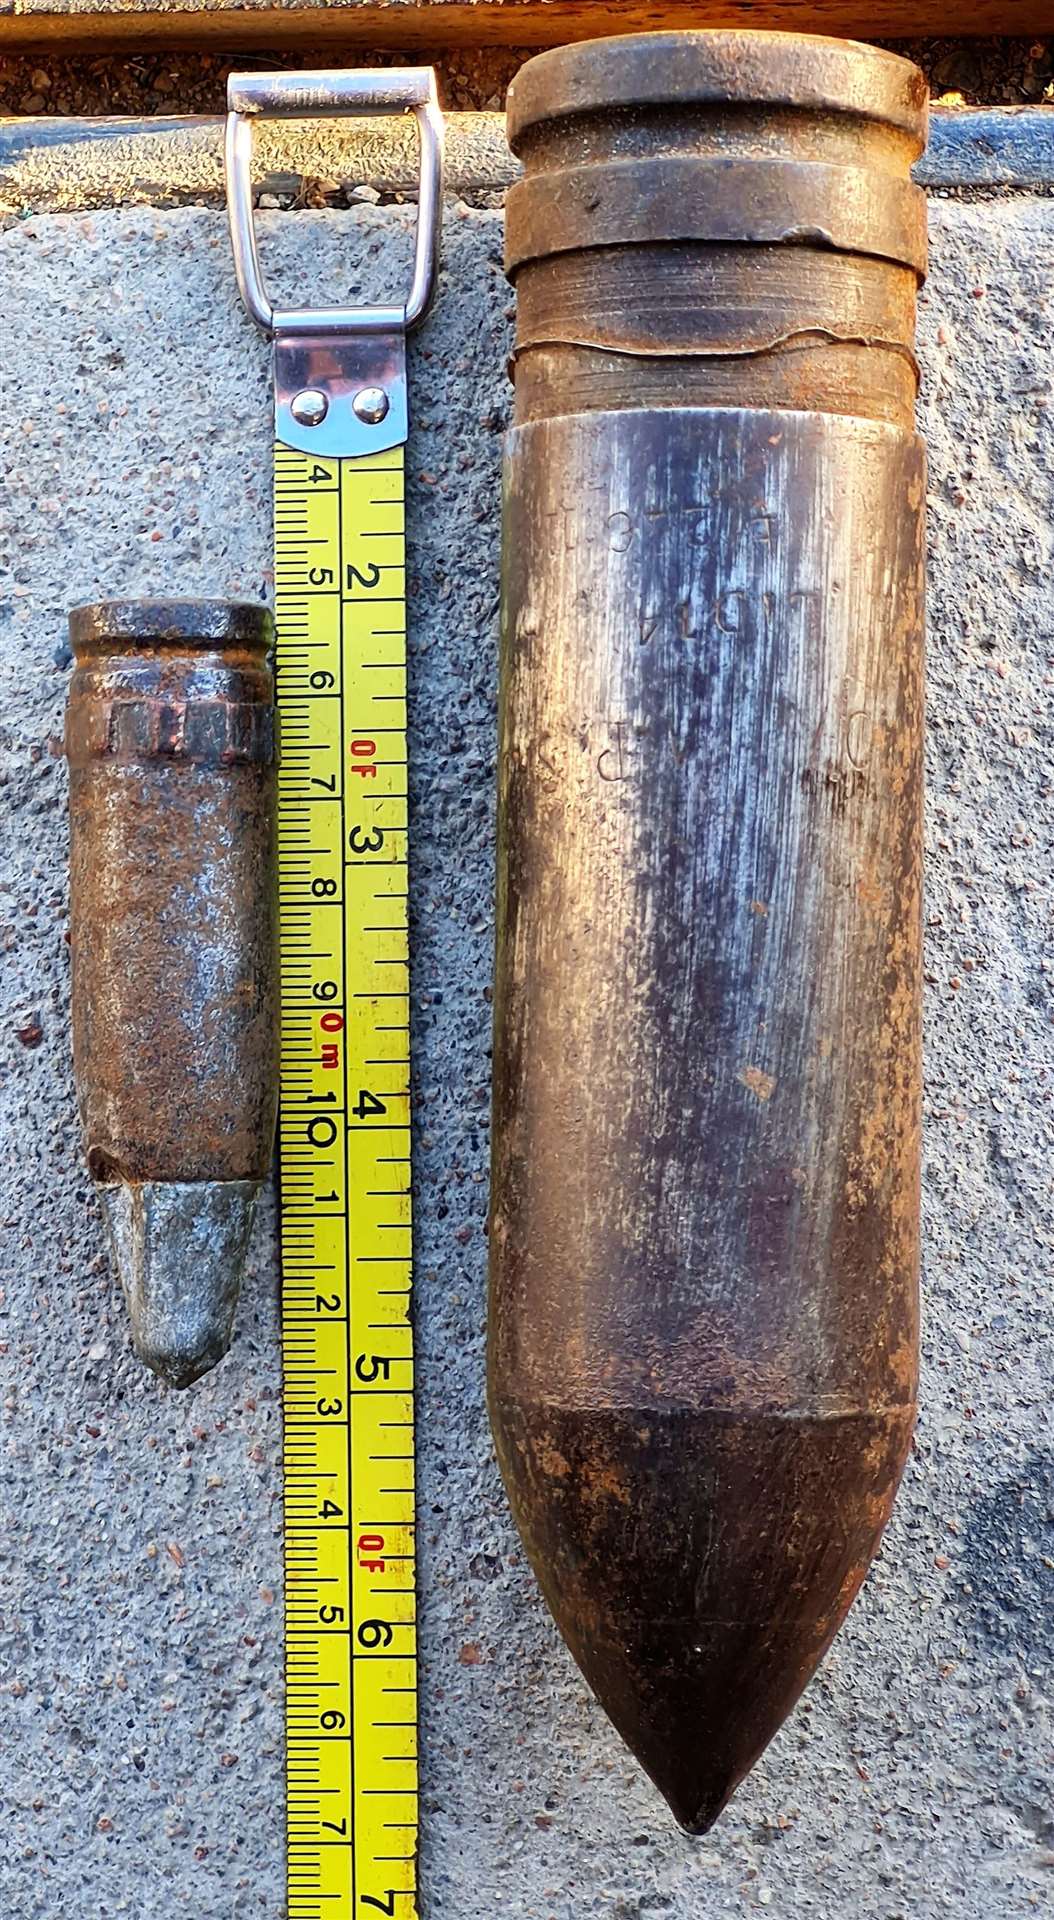 One shell was about seven inches and the other was three inches long.